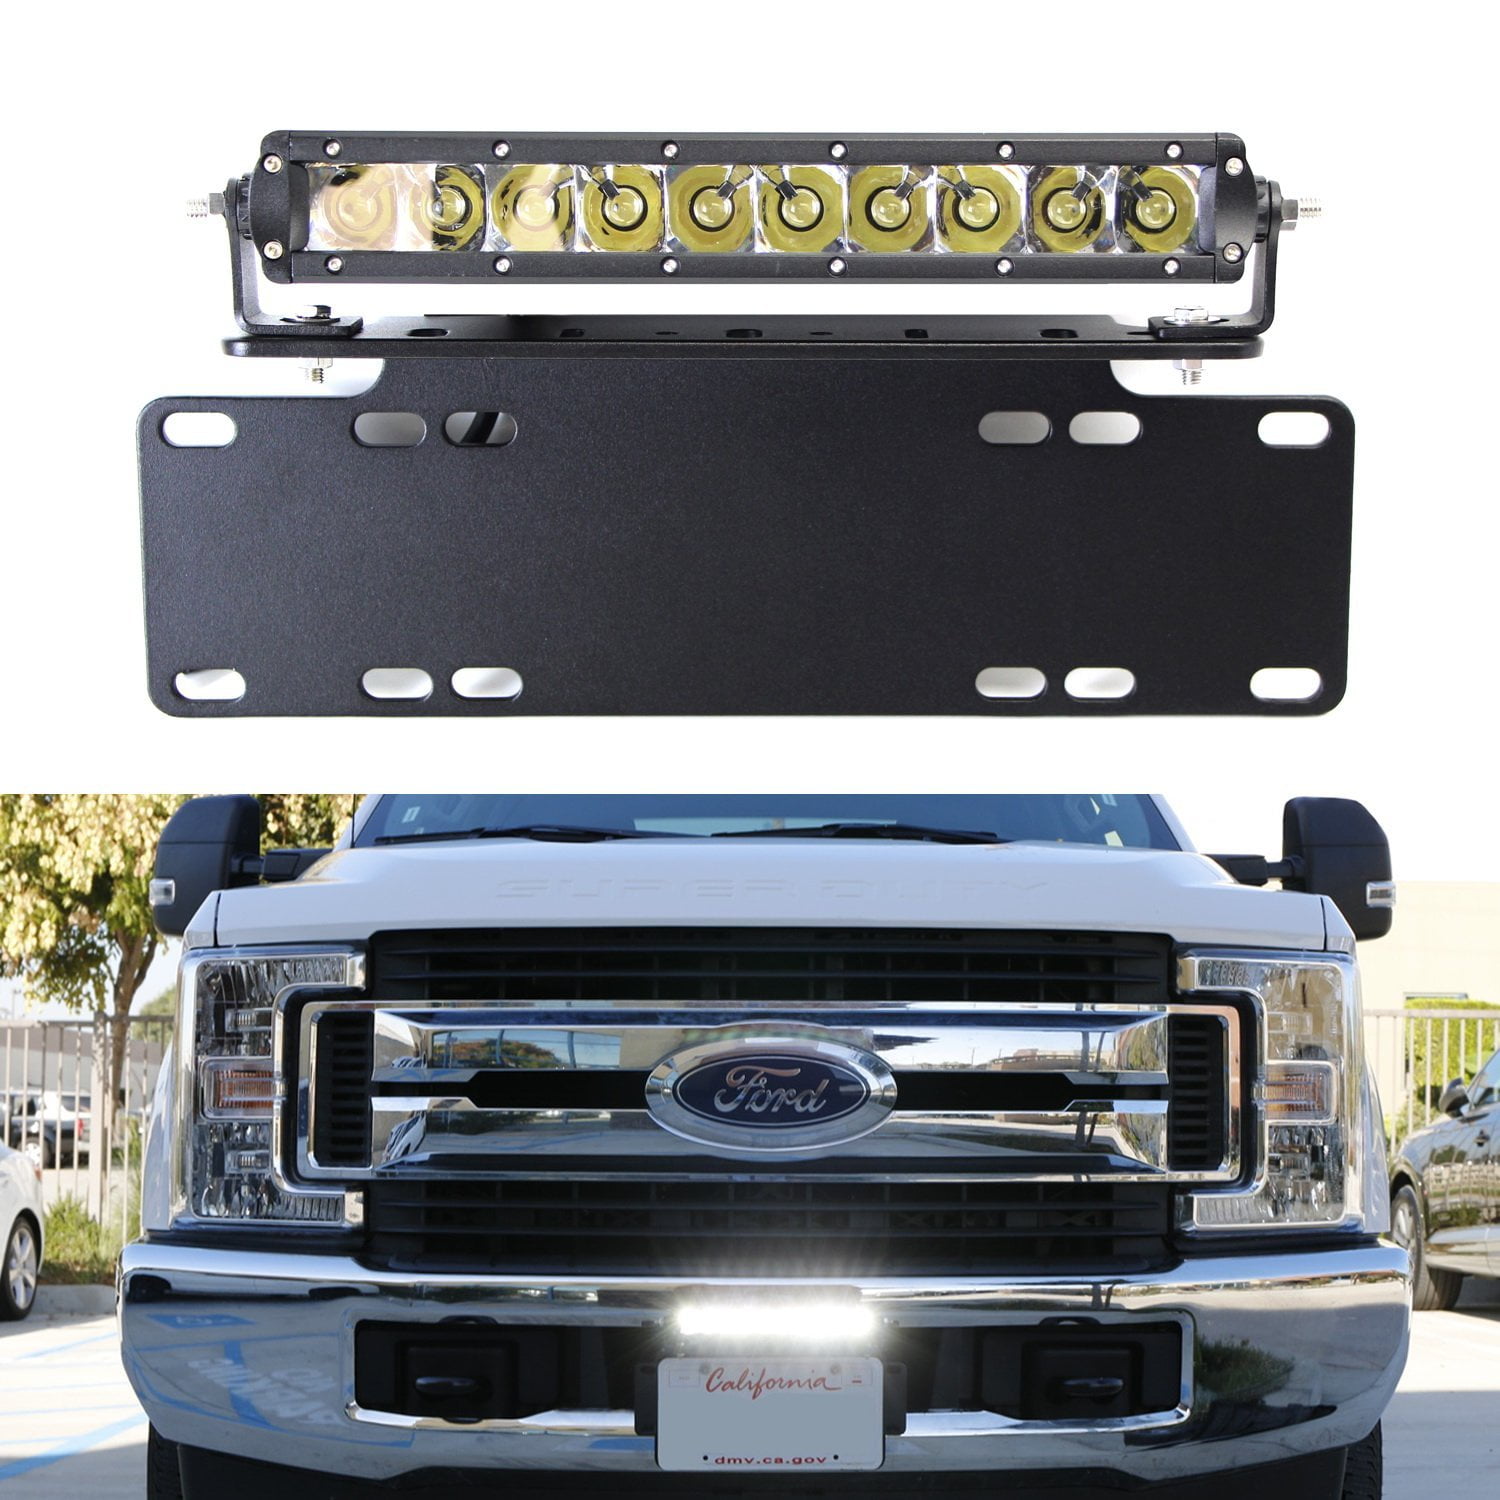 iJDMTOY 50W High Power CREE LED Light Bar w/ Front License Plate